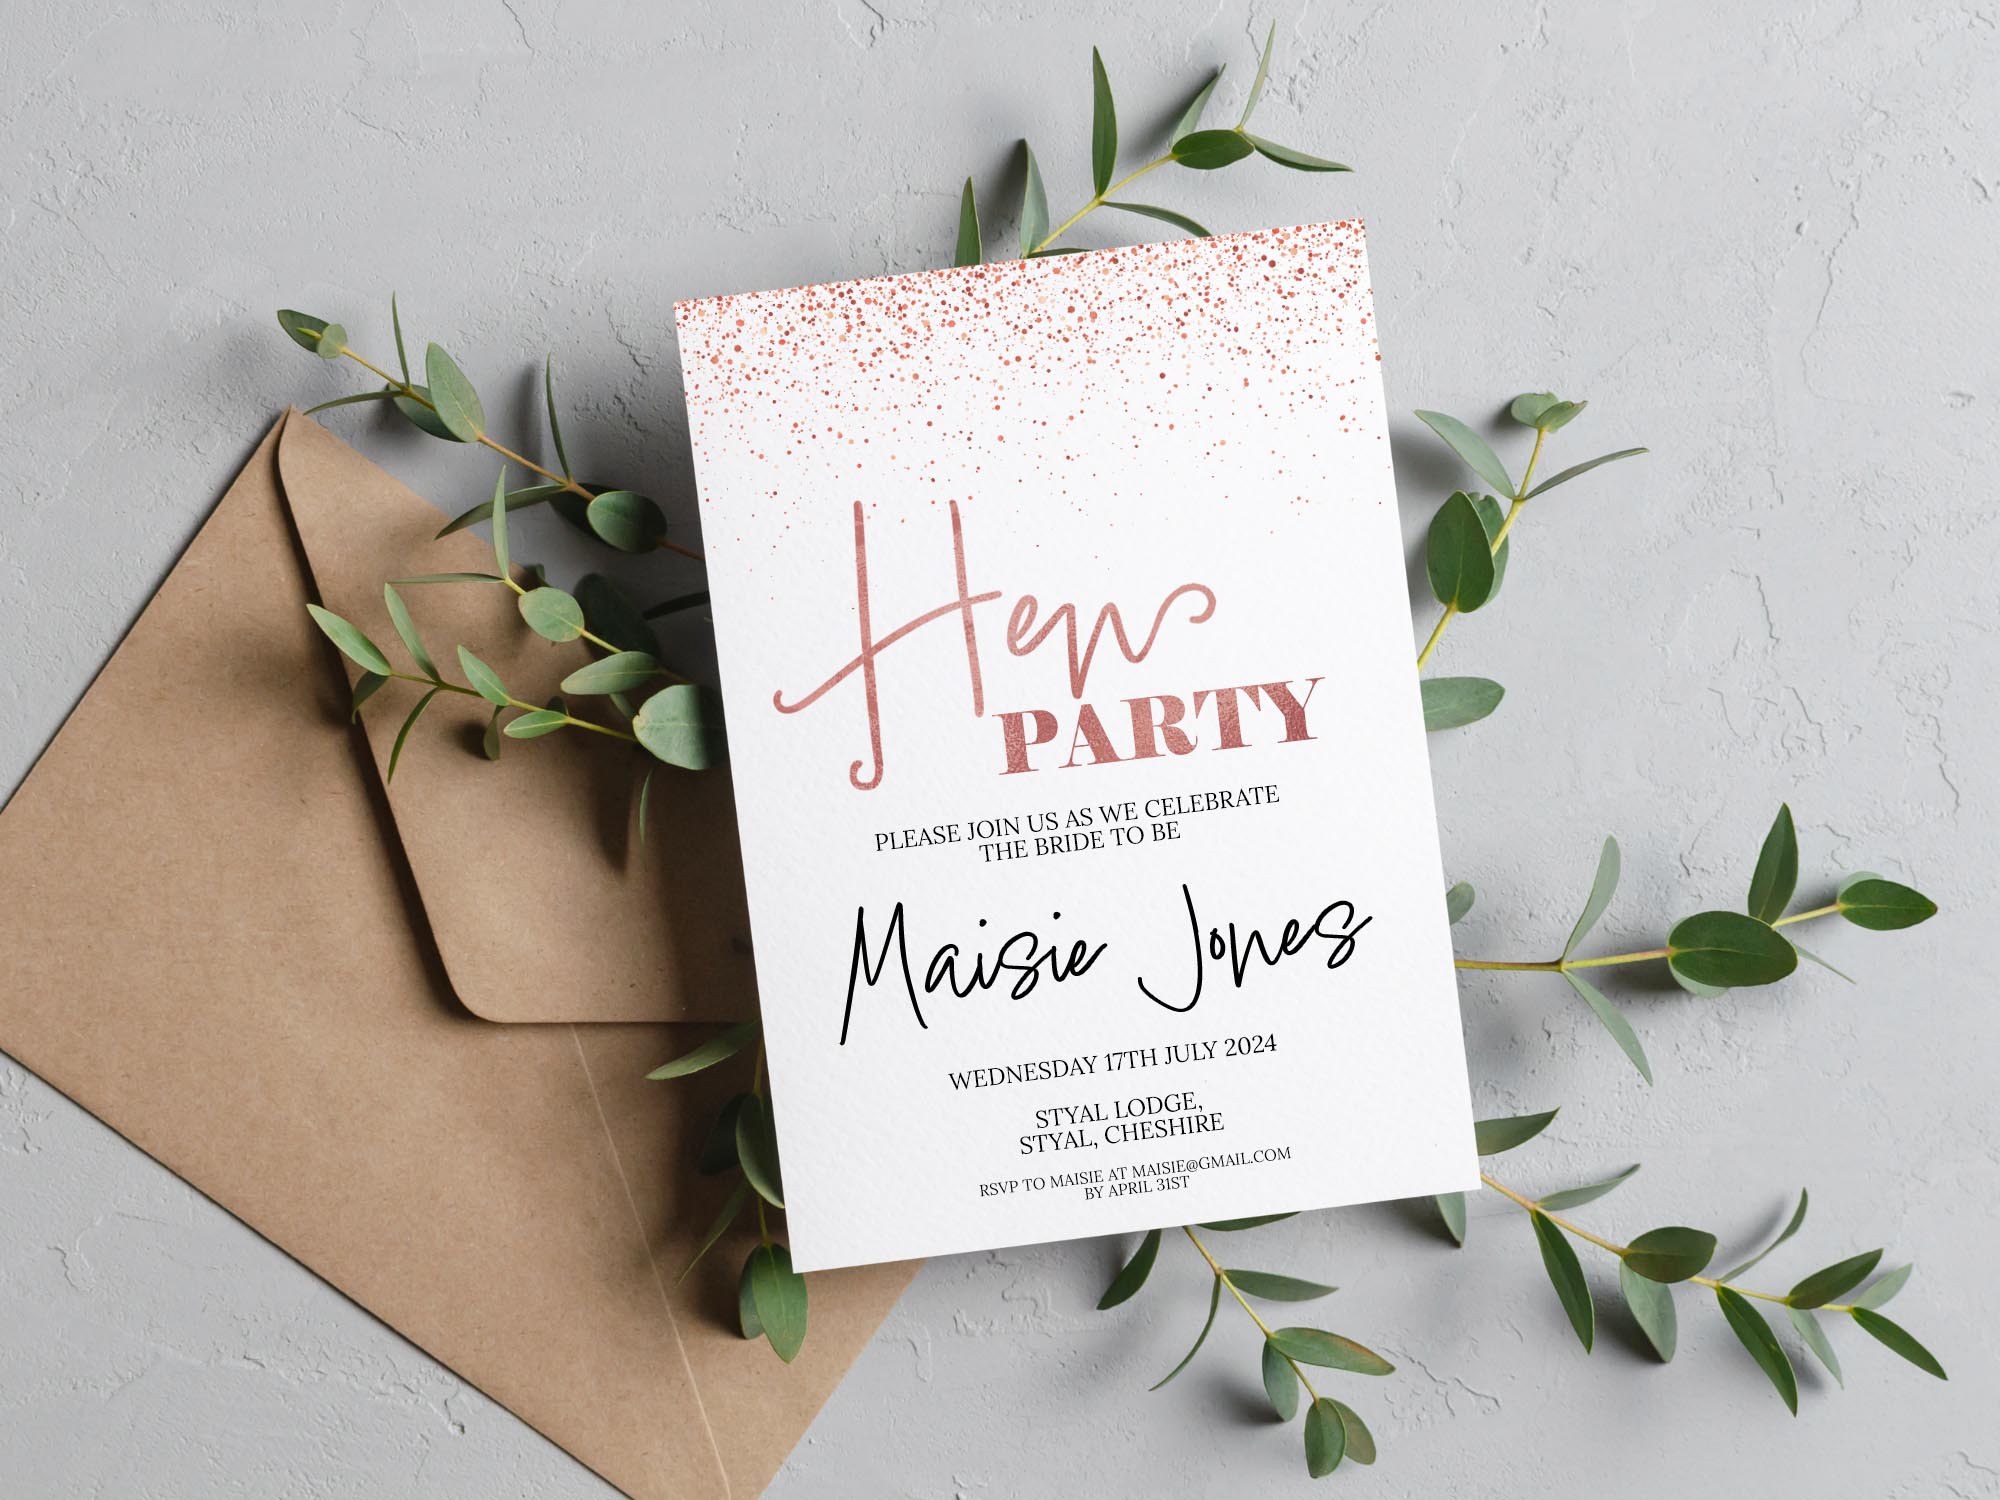 Send out Hen Party Invites!